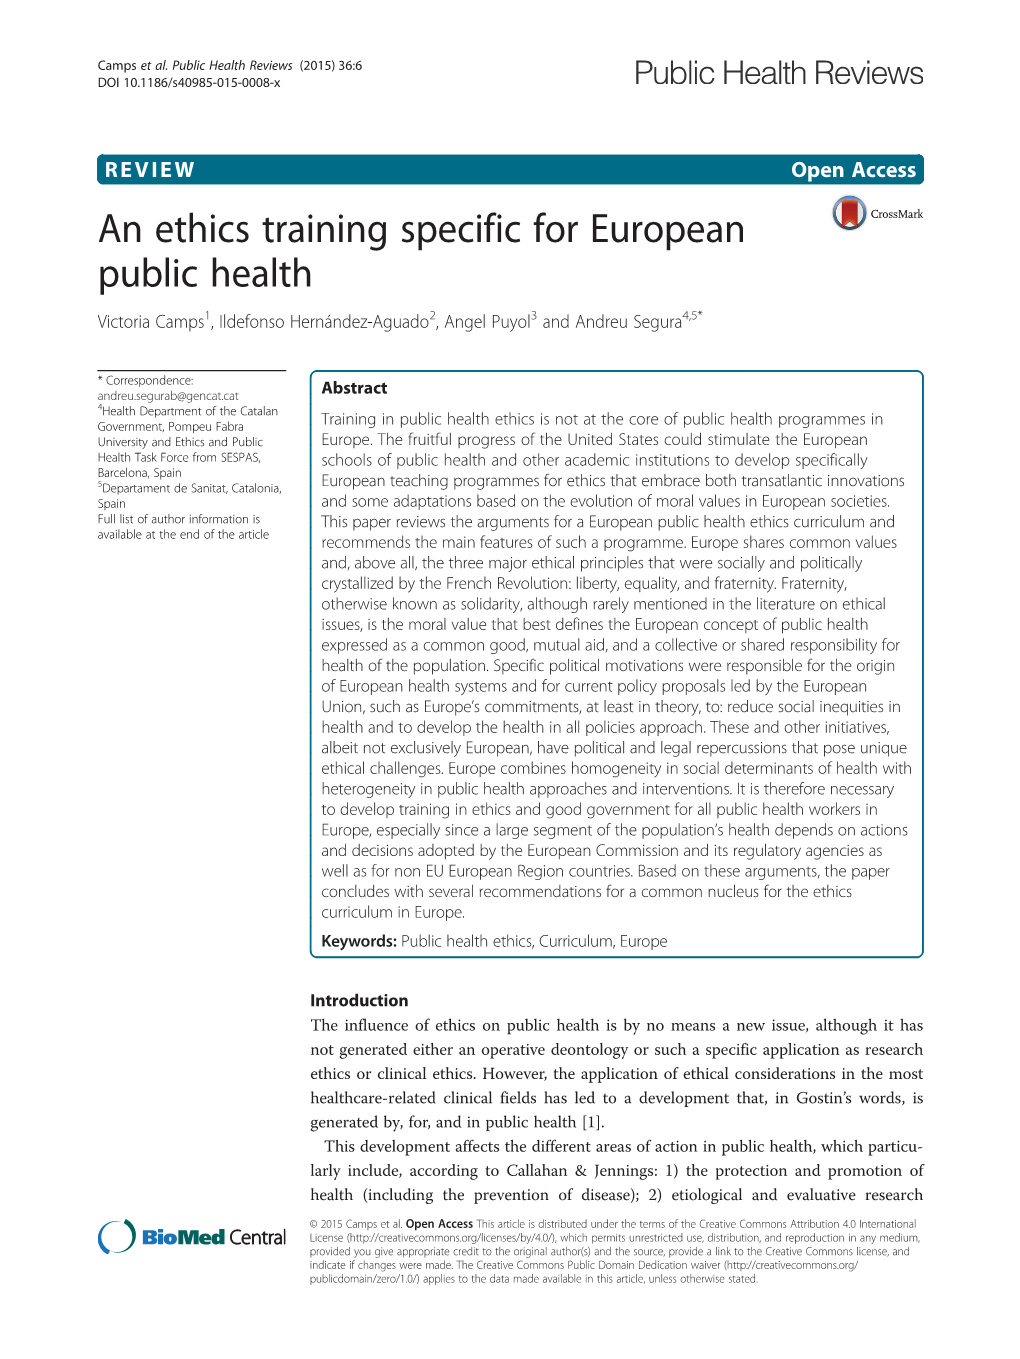 An Ethics Training Specific for European Public Health Victoria Camps1, Ildefonso Hernández-Aguado2, Angel Puyol3 and Andreu Segura4,5*